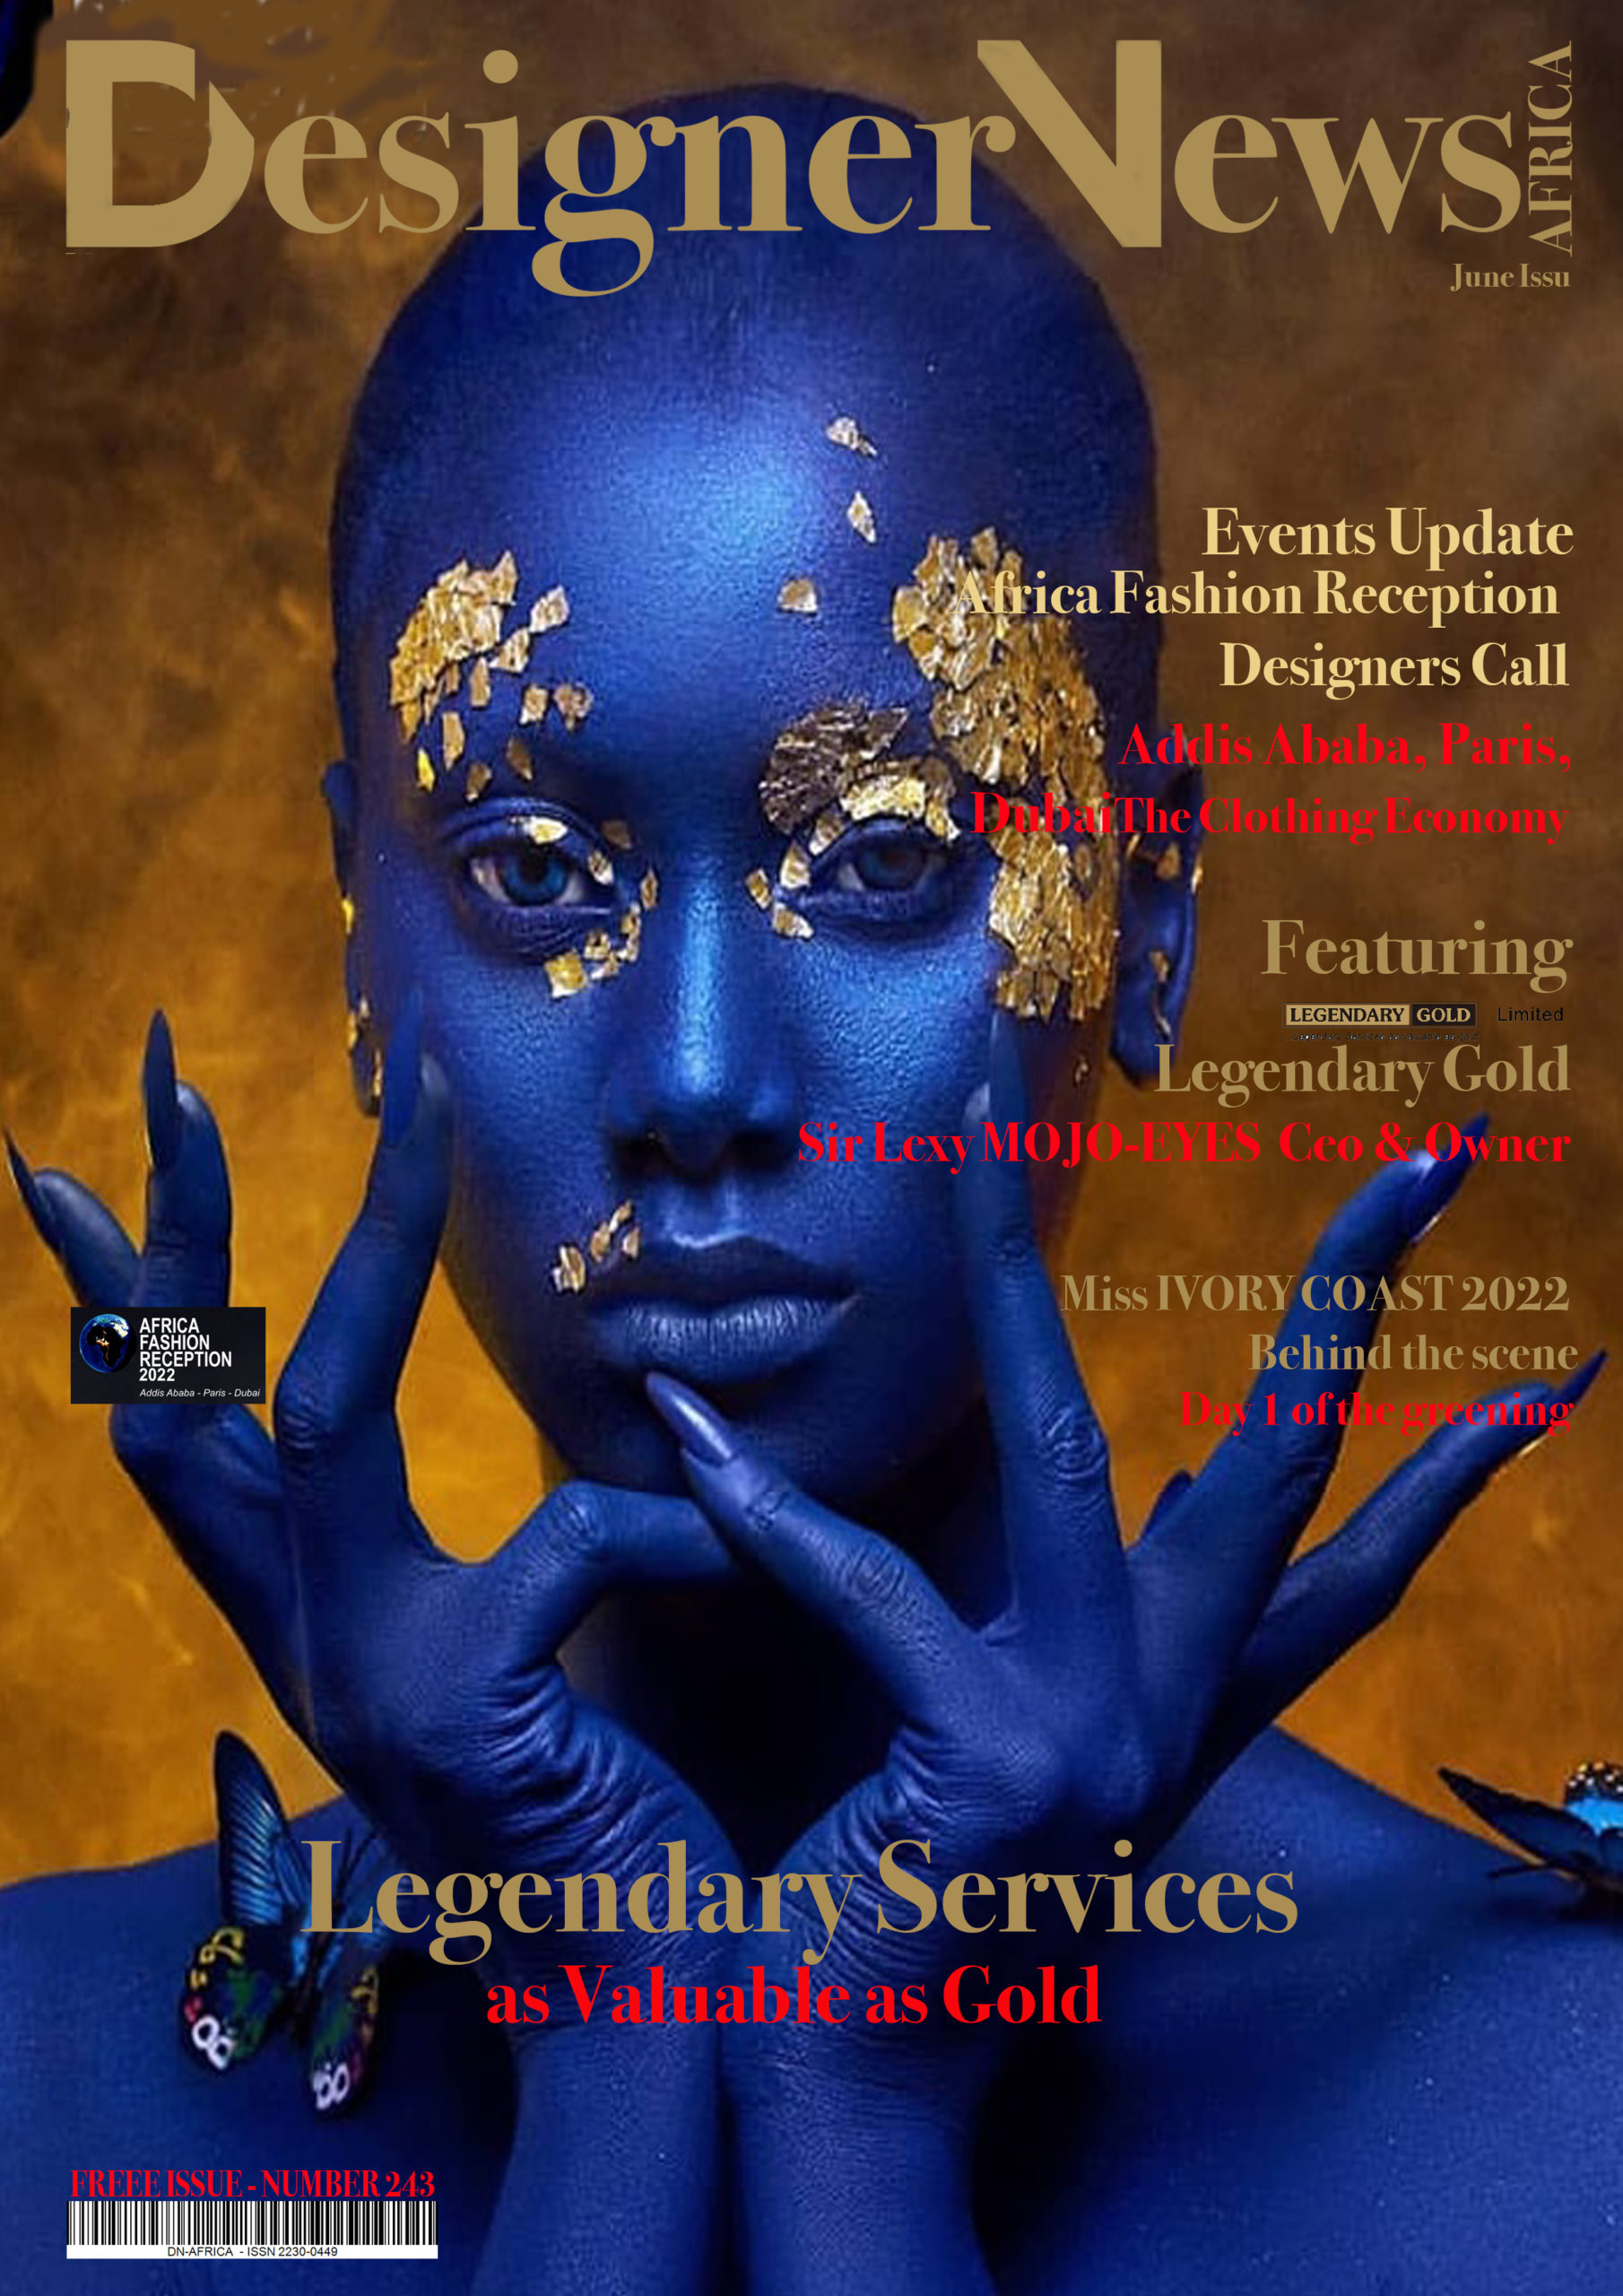 AFRICA FASHION RECEPTION-COVER-DN-AFRICA-COVER-JUN-2022-MAG-NUMBER-243-2022–AFRICAN-FASHION-RECEPTION-BY-LEGENDARY-GOLD-LEXY-MOYO-EYES-Ceo-and-Owner--DN-AFRICA-DN-A-INERNATIONAL-Media-Partner-AS-VOGUE-COVER